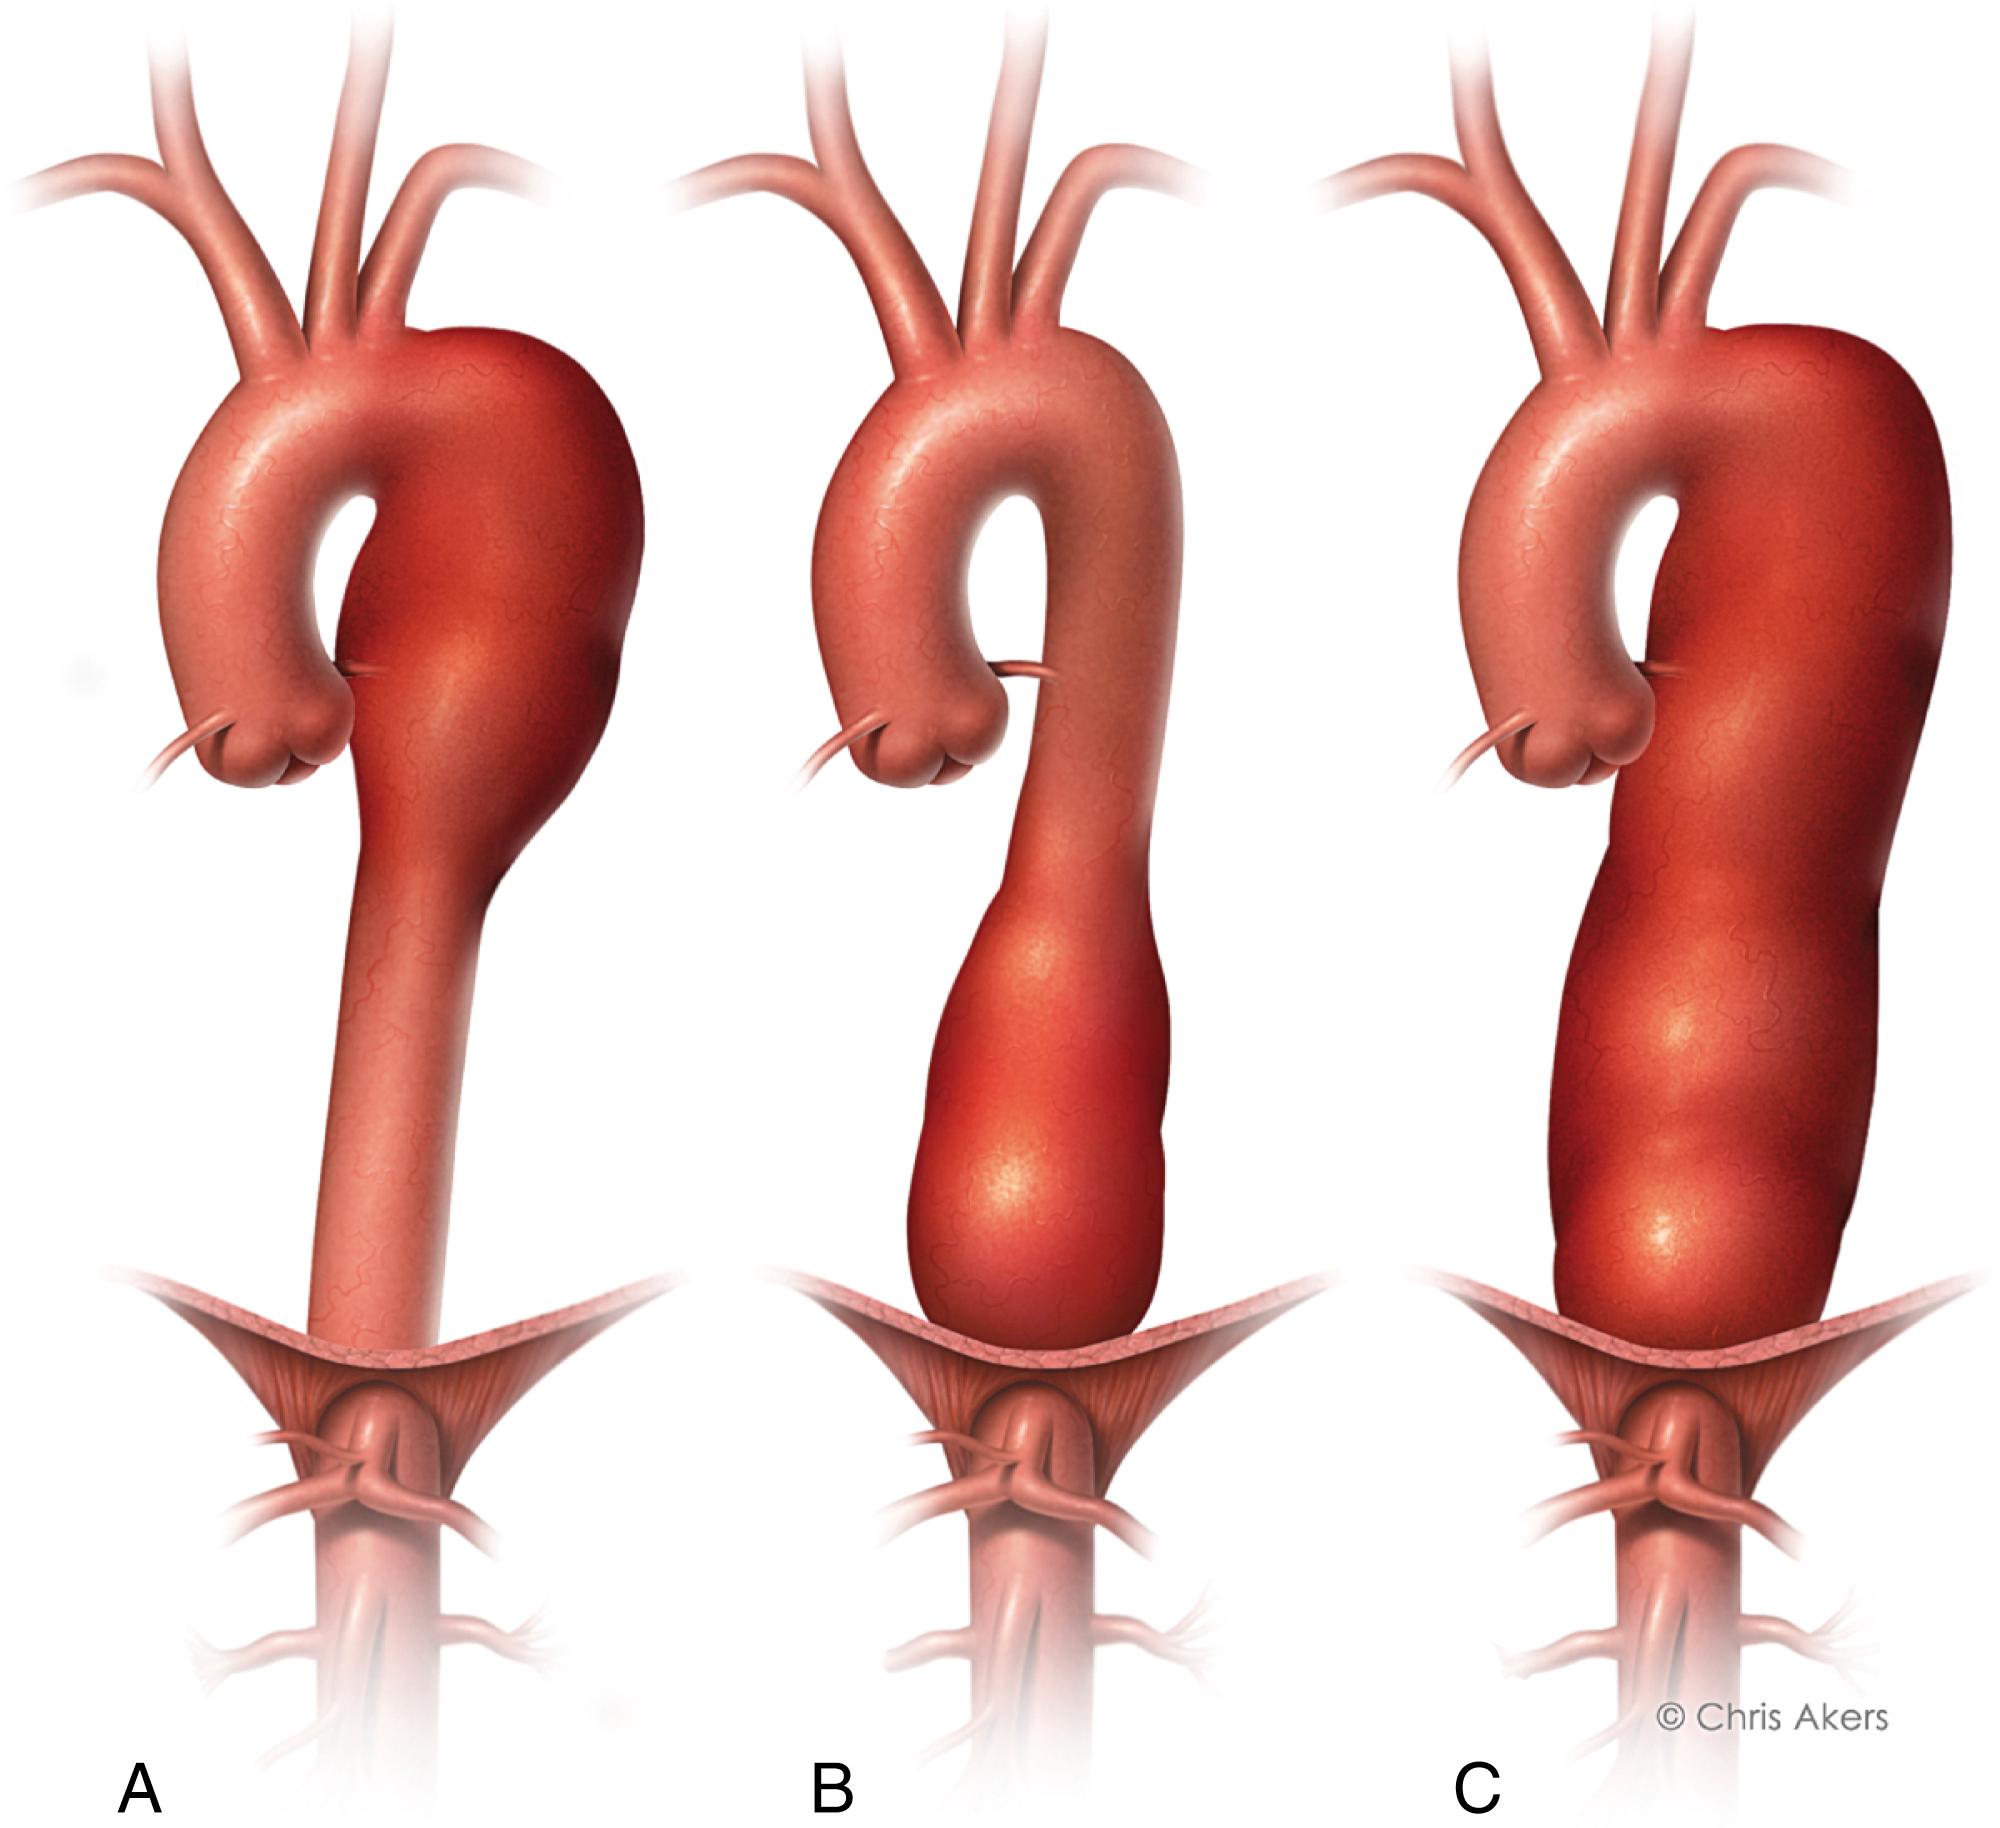 Fig. 62.3, Classification, descending thoracic aortic aneurysm. (A) Type A, distal to the left subclavian artery to the sixth intercostal space. (B) Type B, sixth intercostal space to above the diaphragm (twelfth intercostal space). (C) Type C, entire descending thoracic aorta, distal to the left subclavian artery to above the diaphragm (twelfth intercostal space).